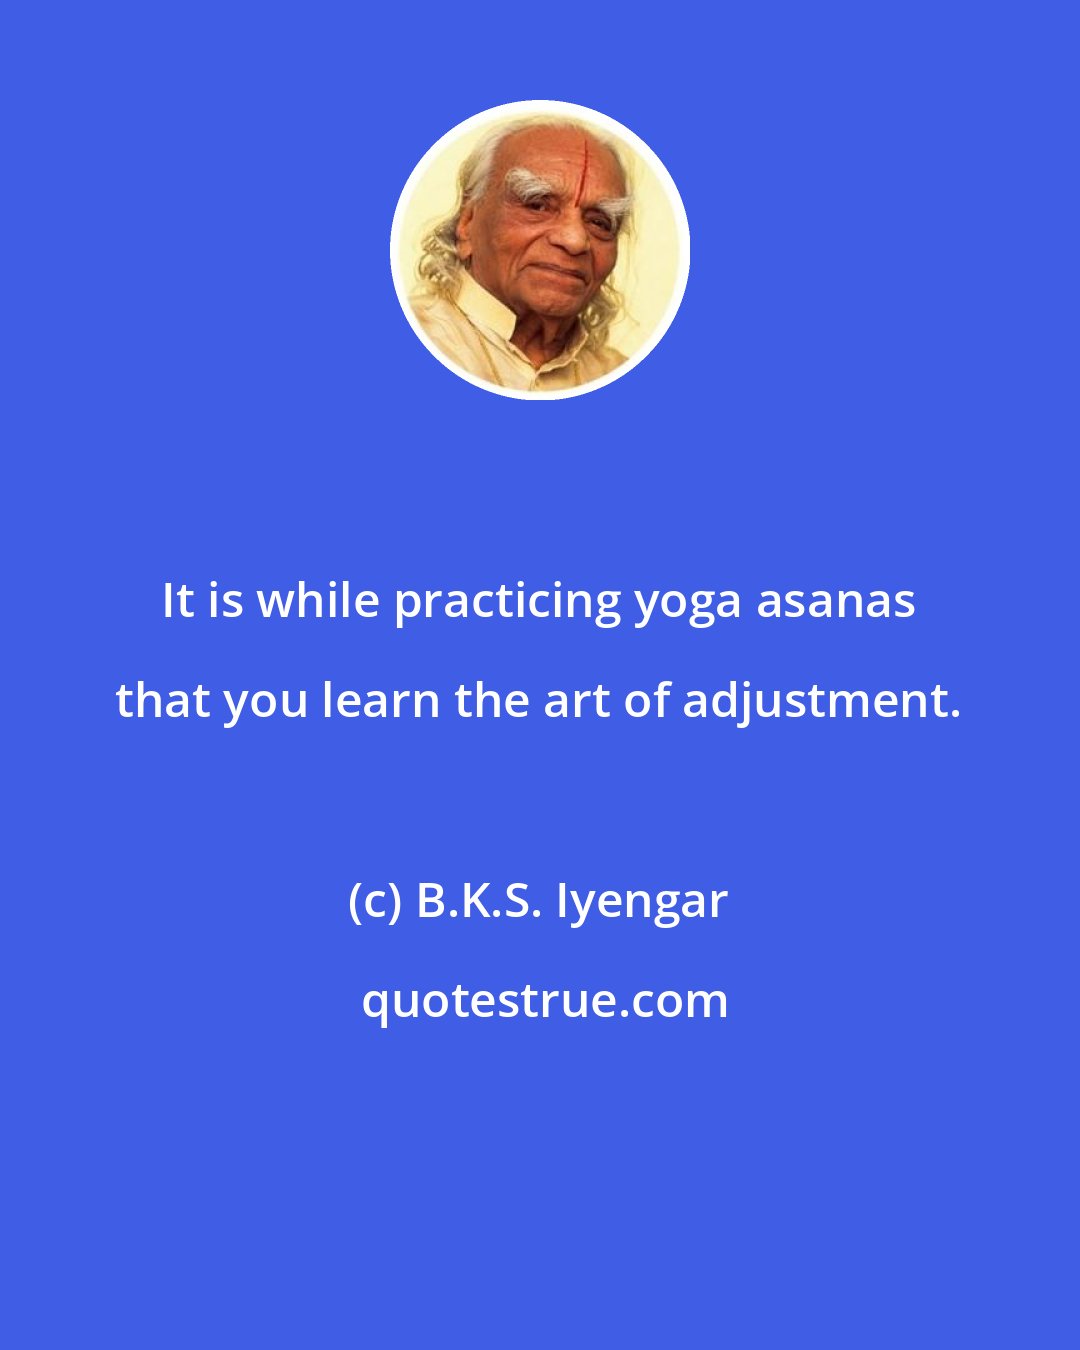 B.K.S. Iyengar: It is while practicing yoga asanas that you learn the art of adjustment.